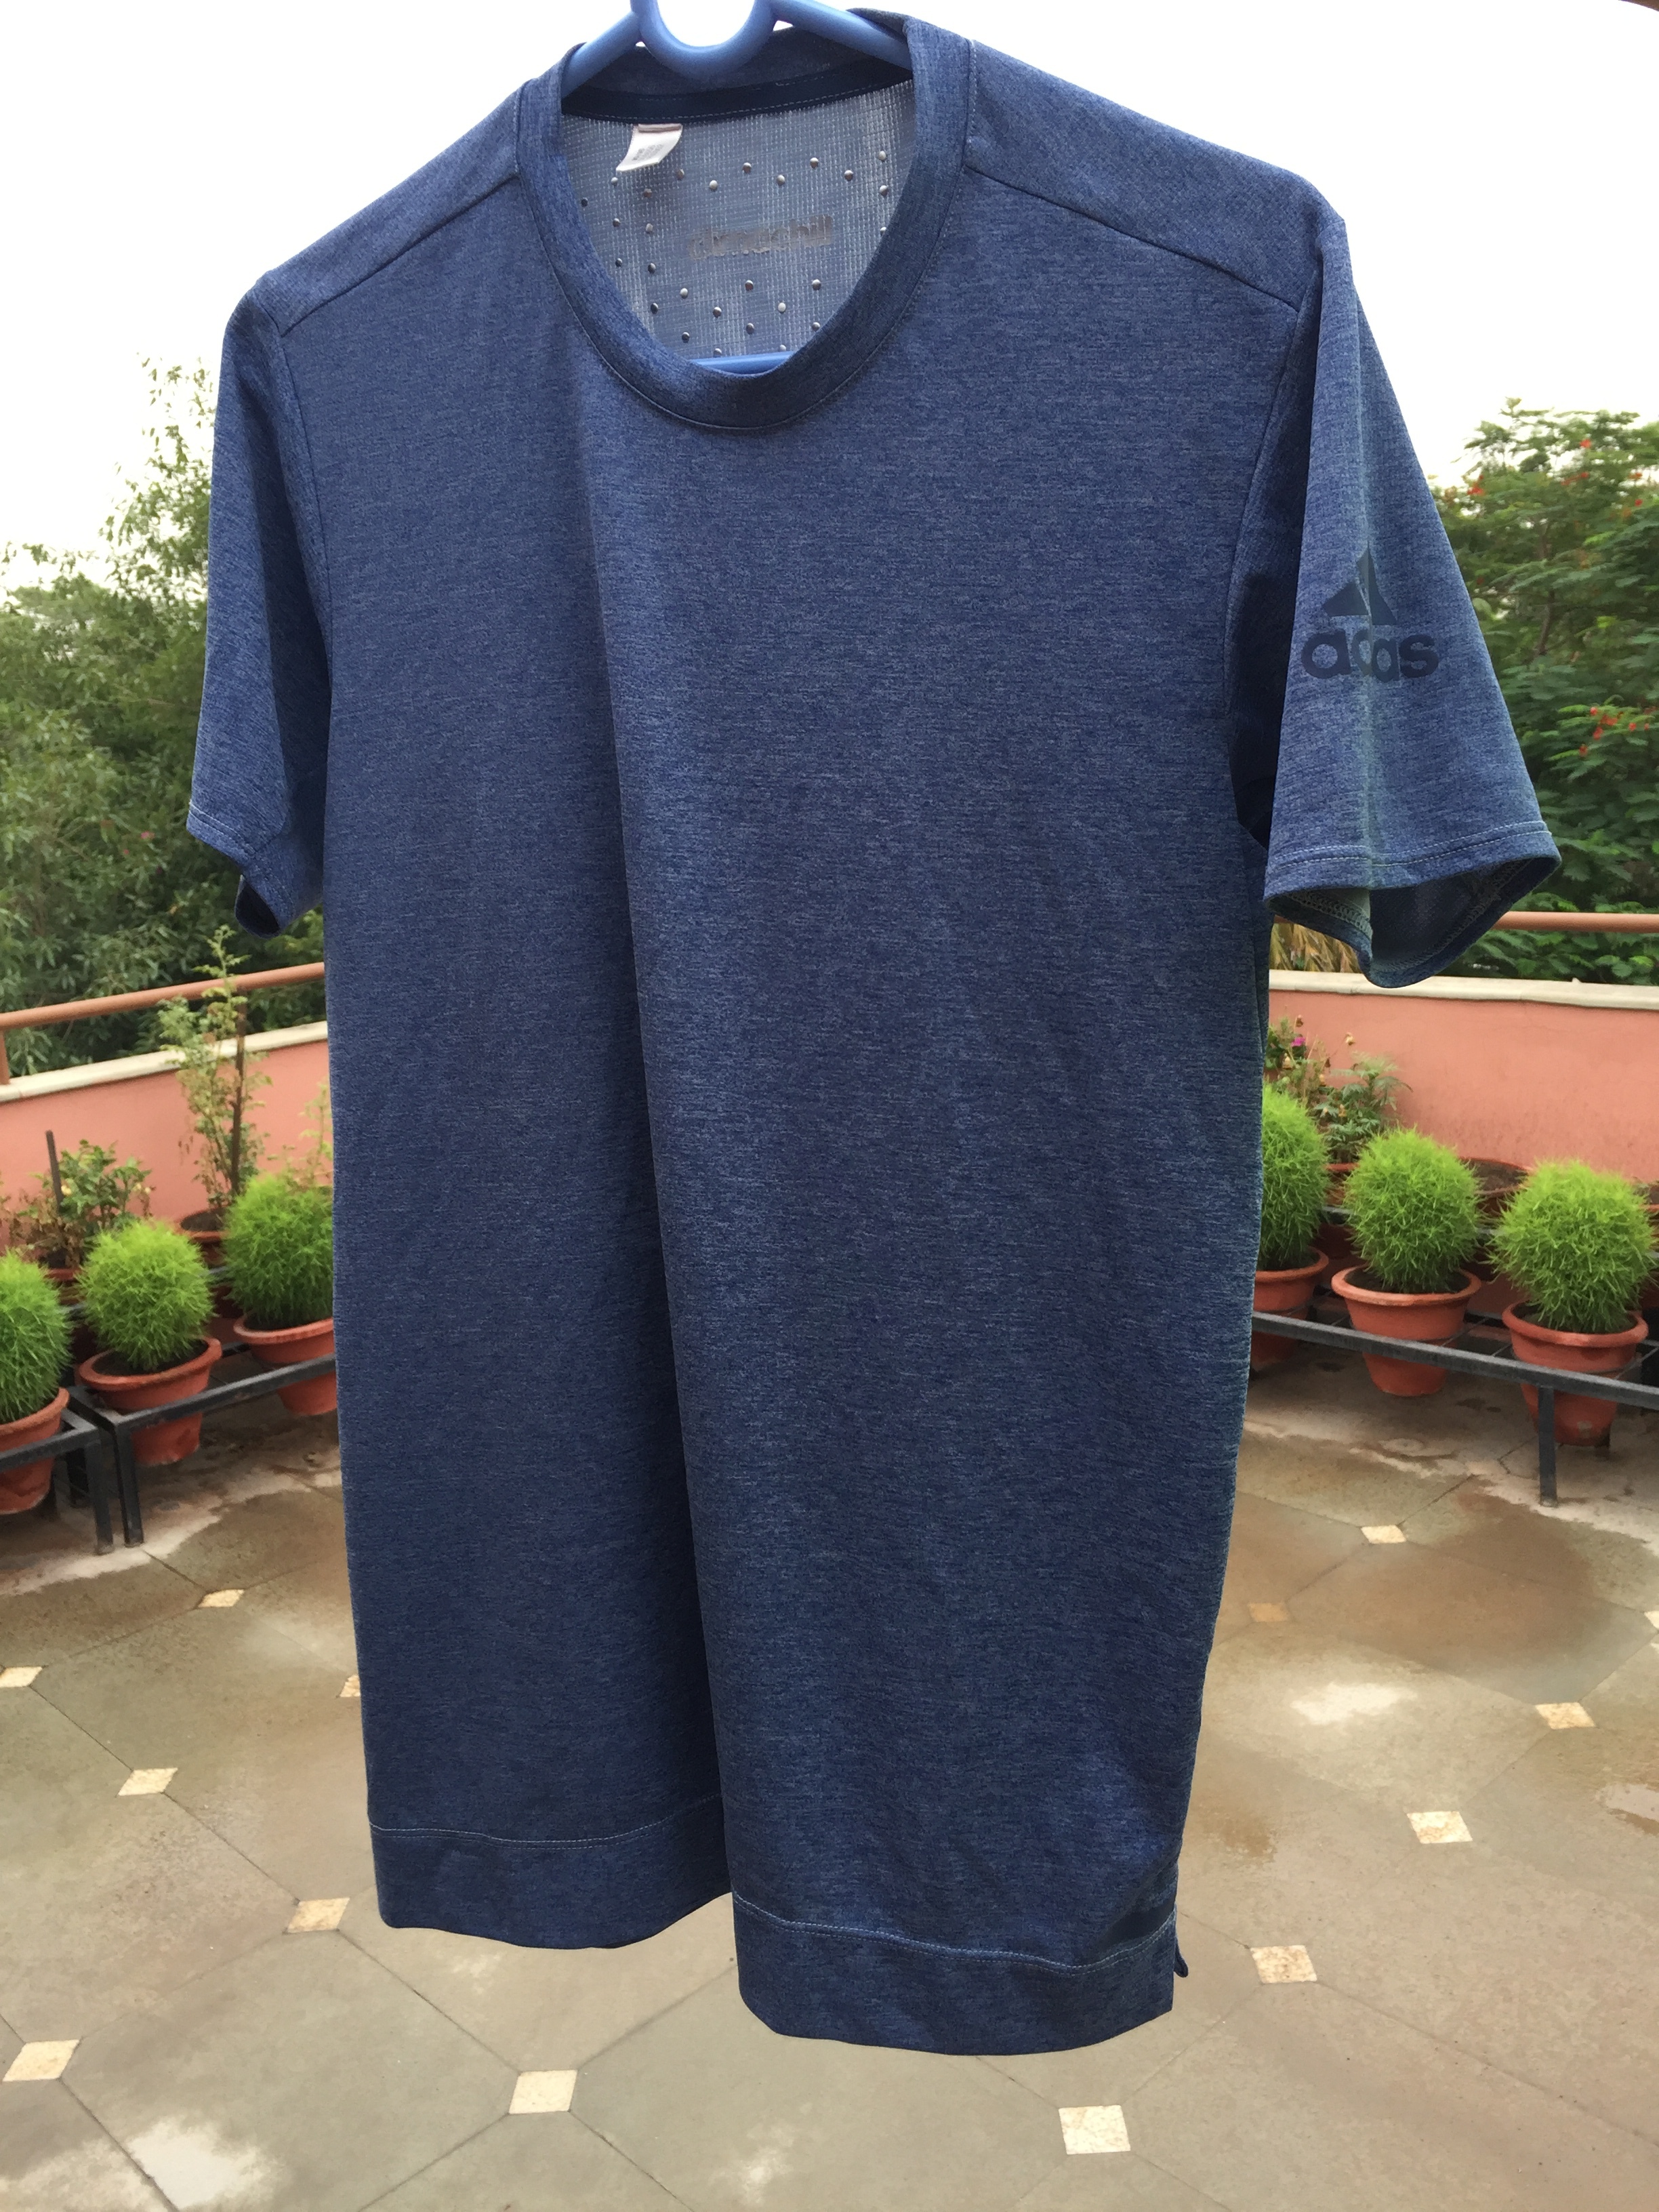 Review: FreeLift Tee ClimaChill t-shirts by adidas — Keep Miling & Smiling